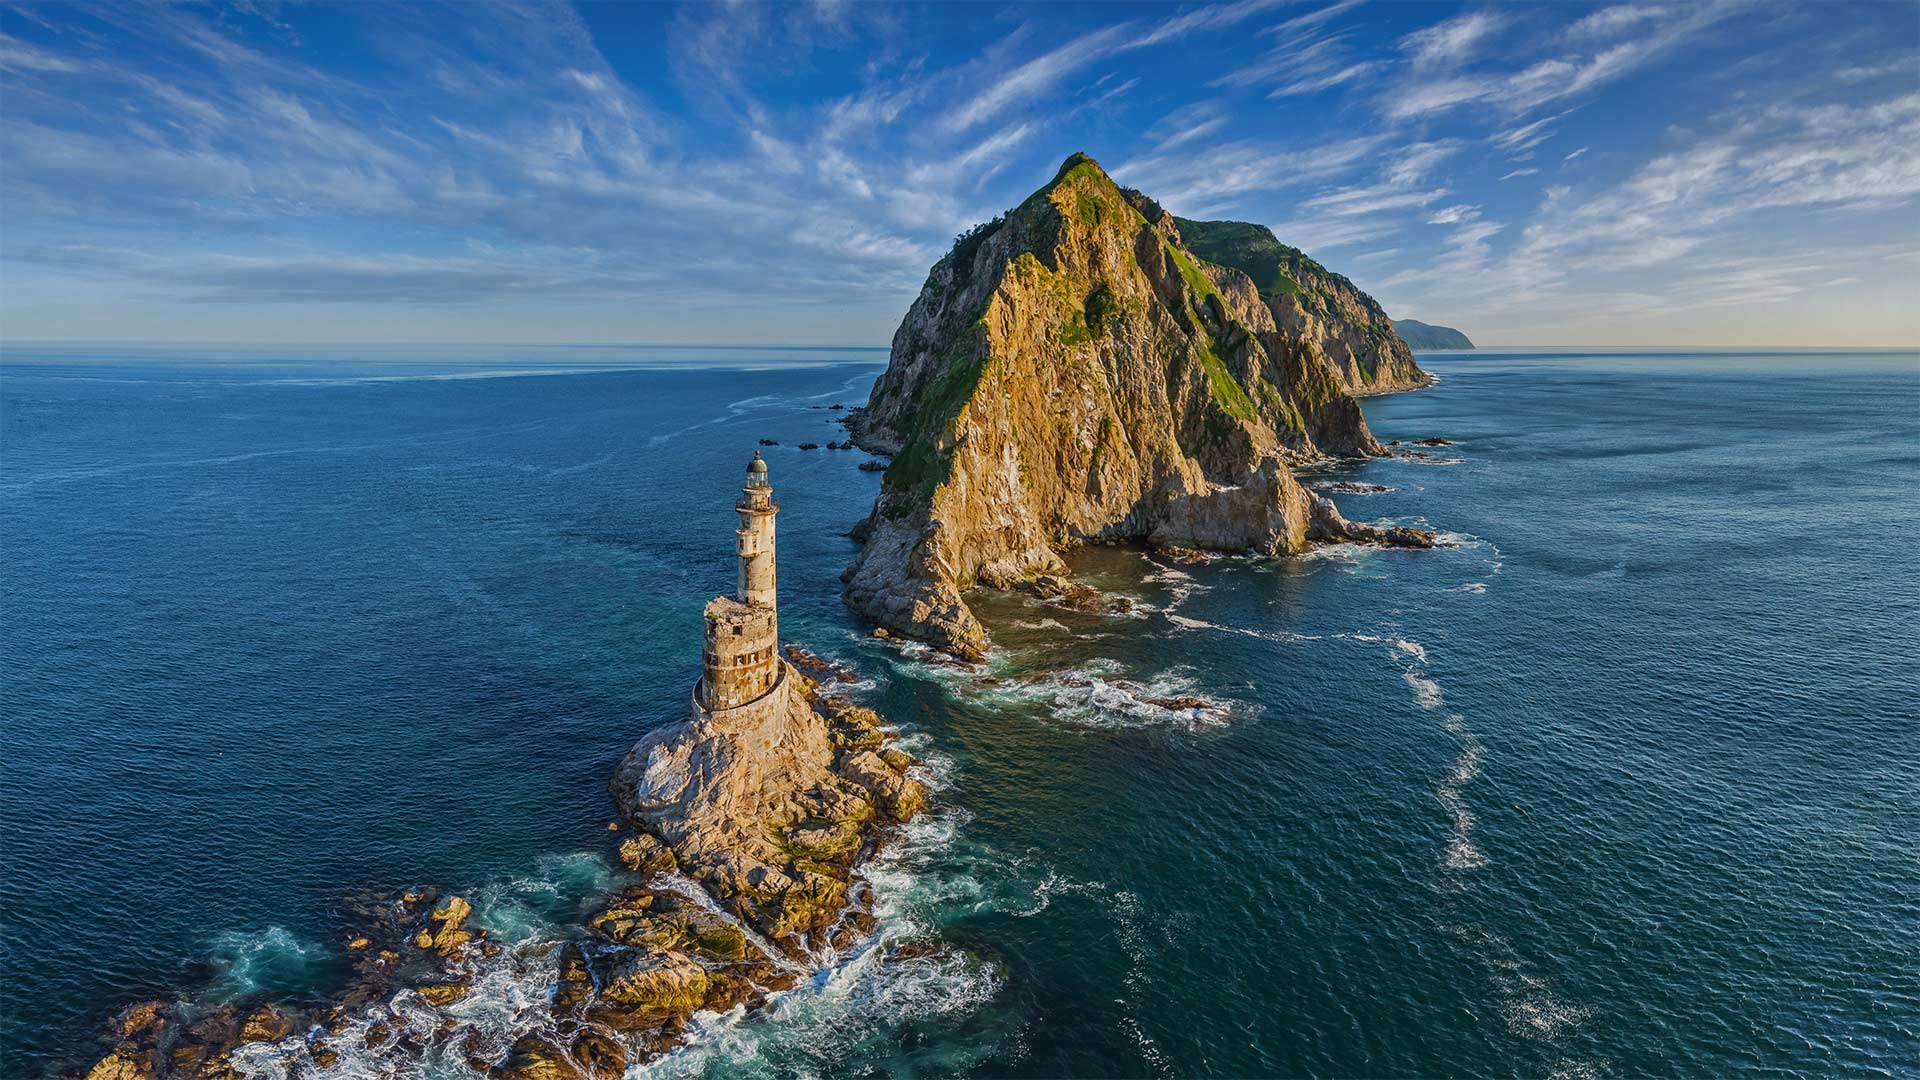 Lighthouse at Cape Aniva, Sakhalin Island, Russia - Amazing Aerial Agency/Offset by Shutterstock)